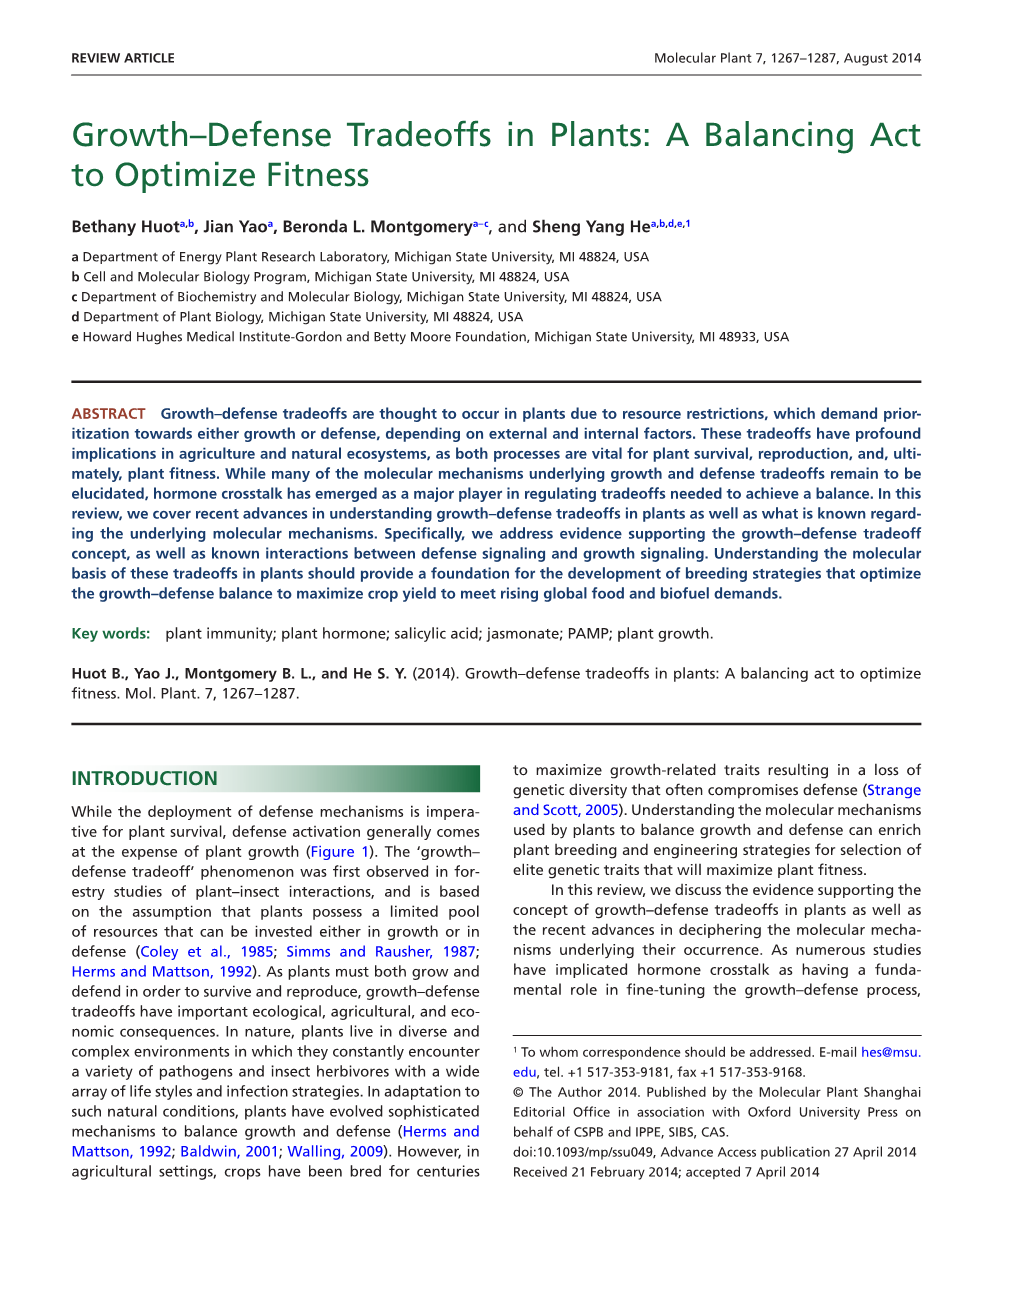 Defense Tradeoffs in Plants: a Balancing Act to Optimize Fitness